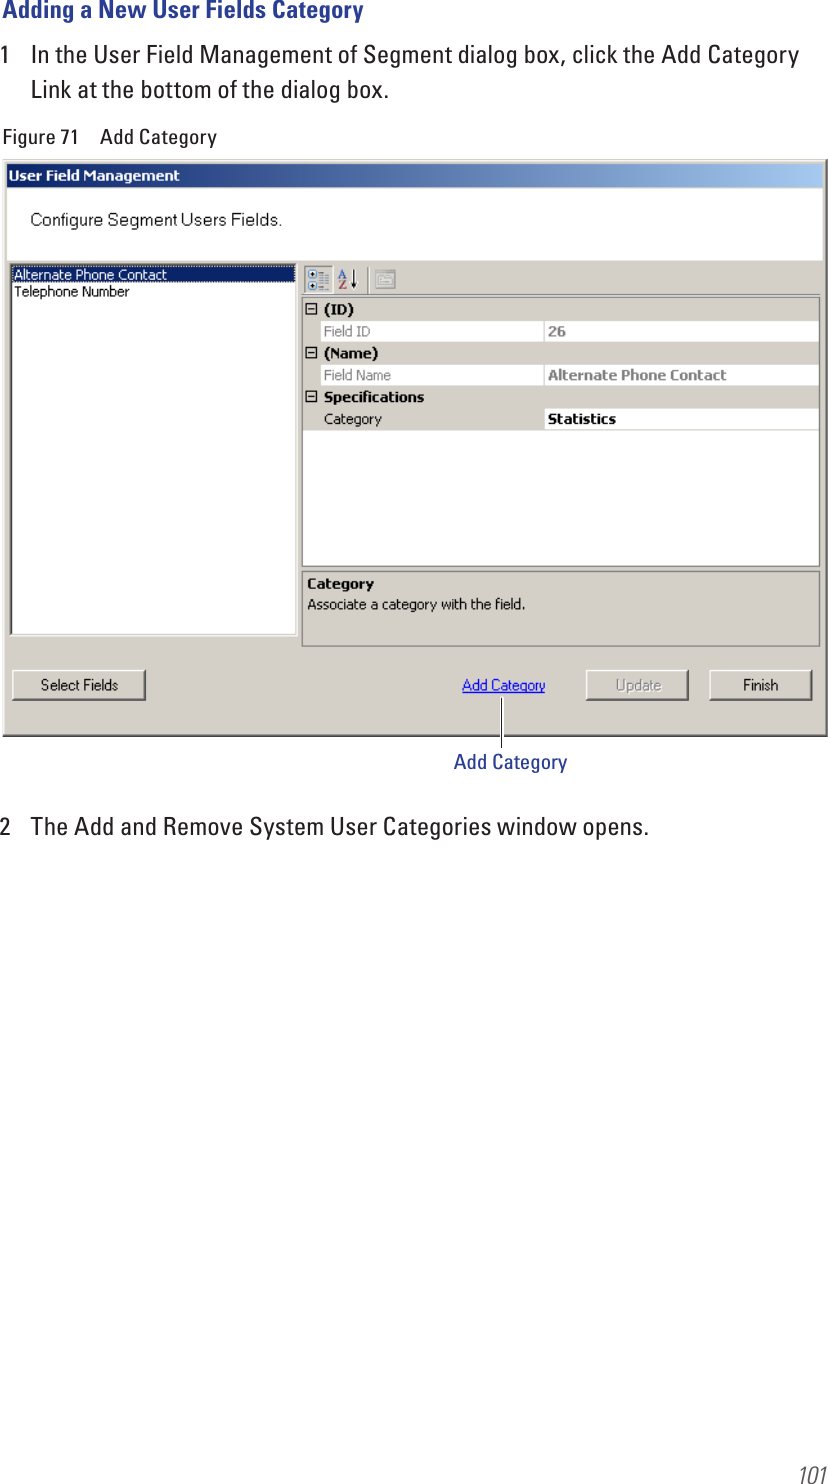 101Adding a New User Fields Category1  In the User Field Management of Segment dialog box, click the Add Category Link at the bottom of the dialog box. Figure 71  Add Category2  The Add and Remove System User Categories window opens.Add Category